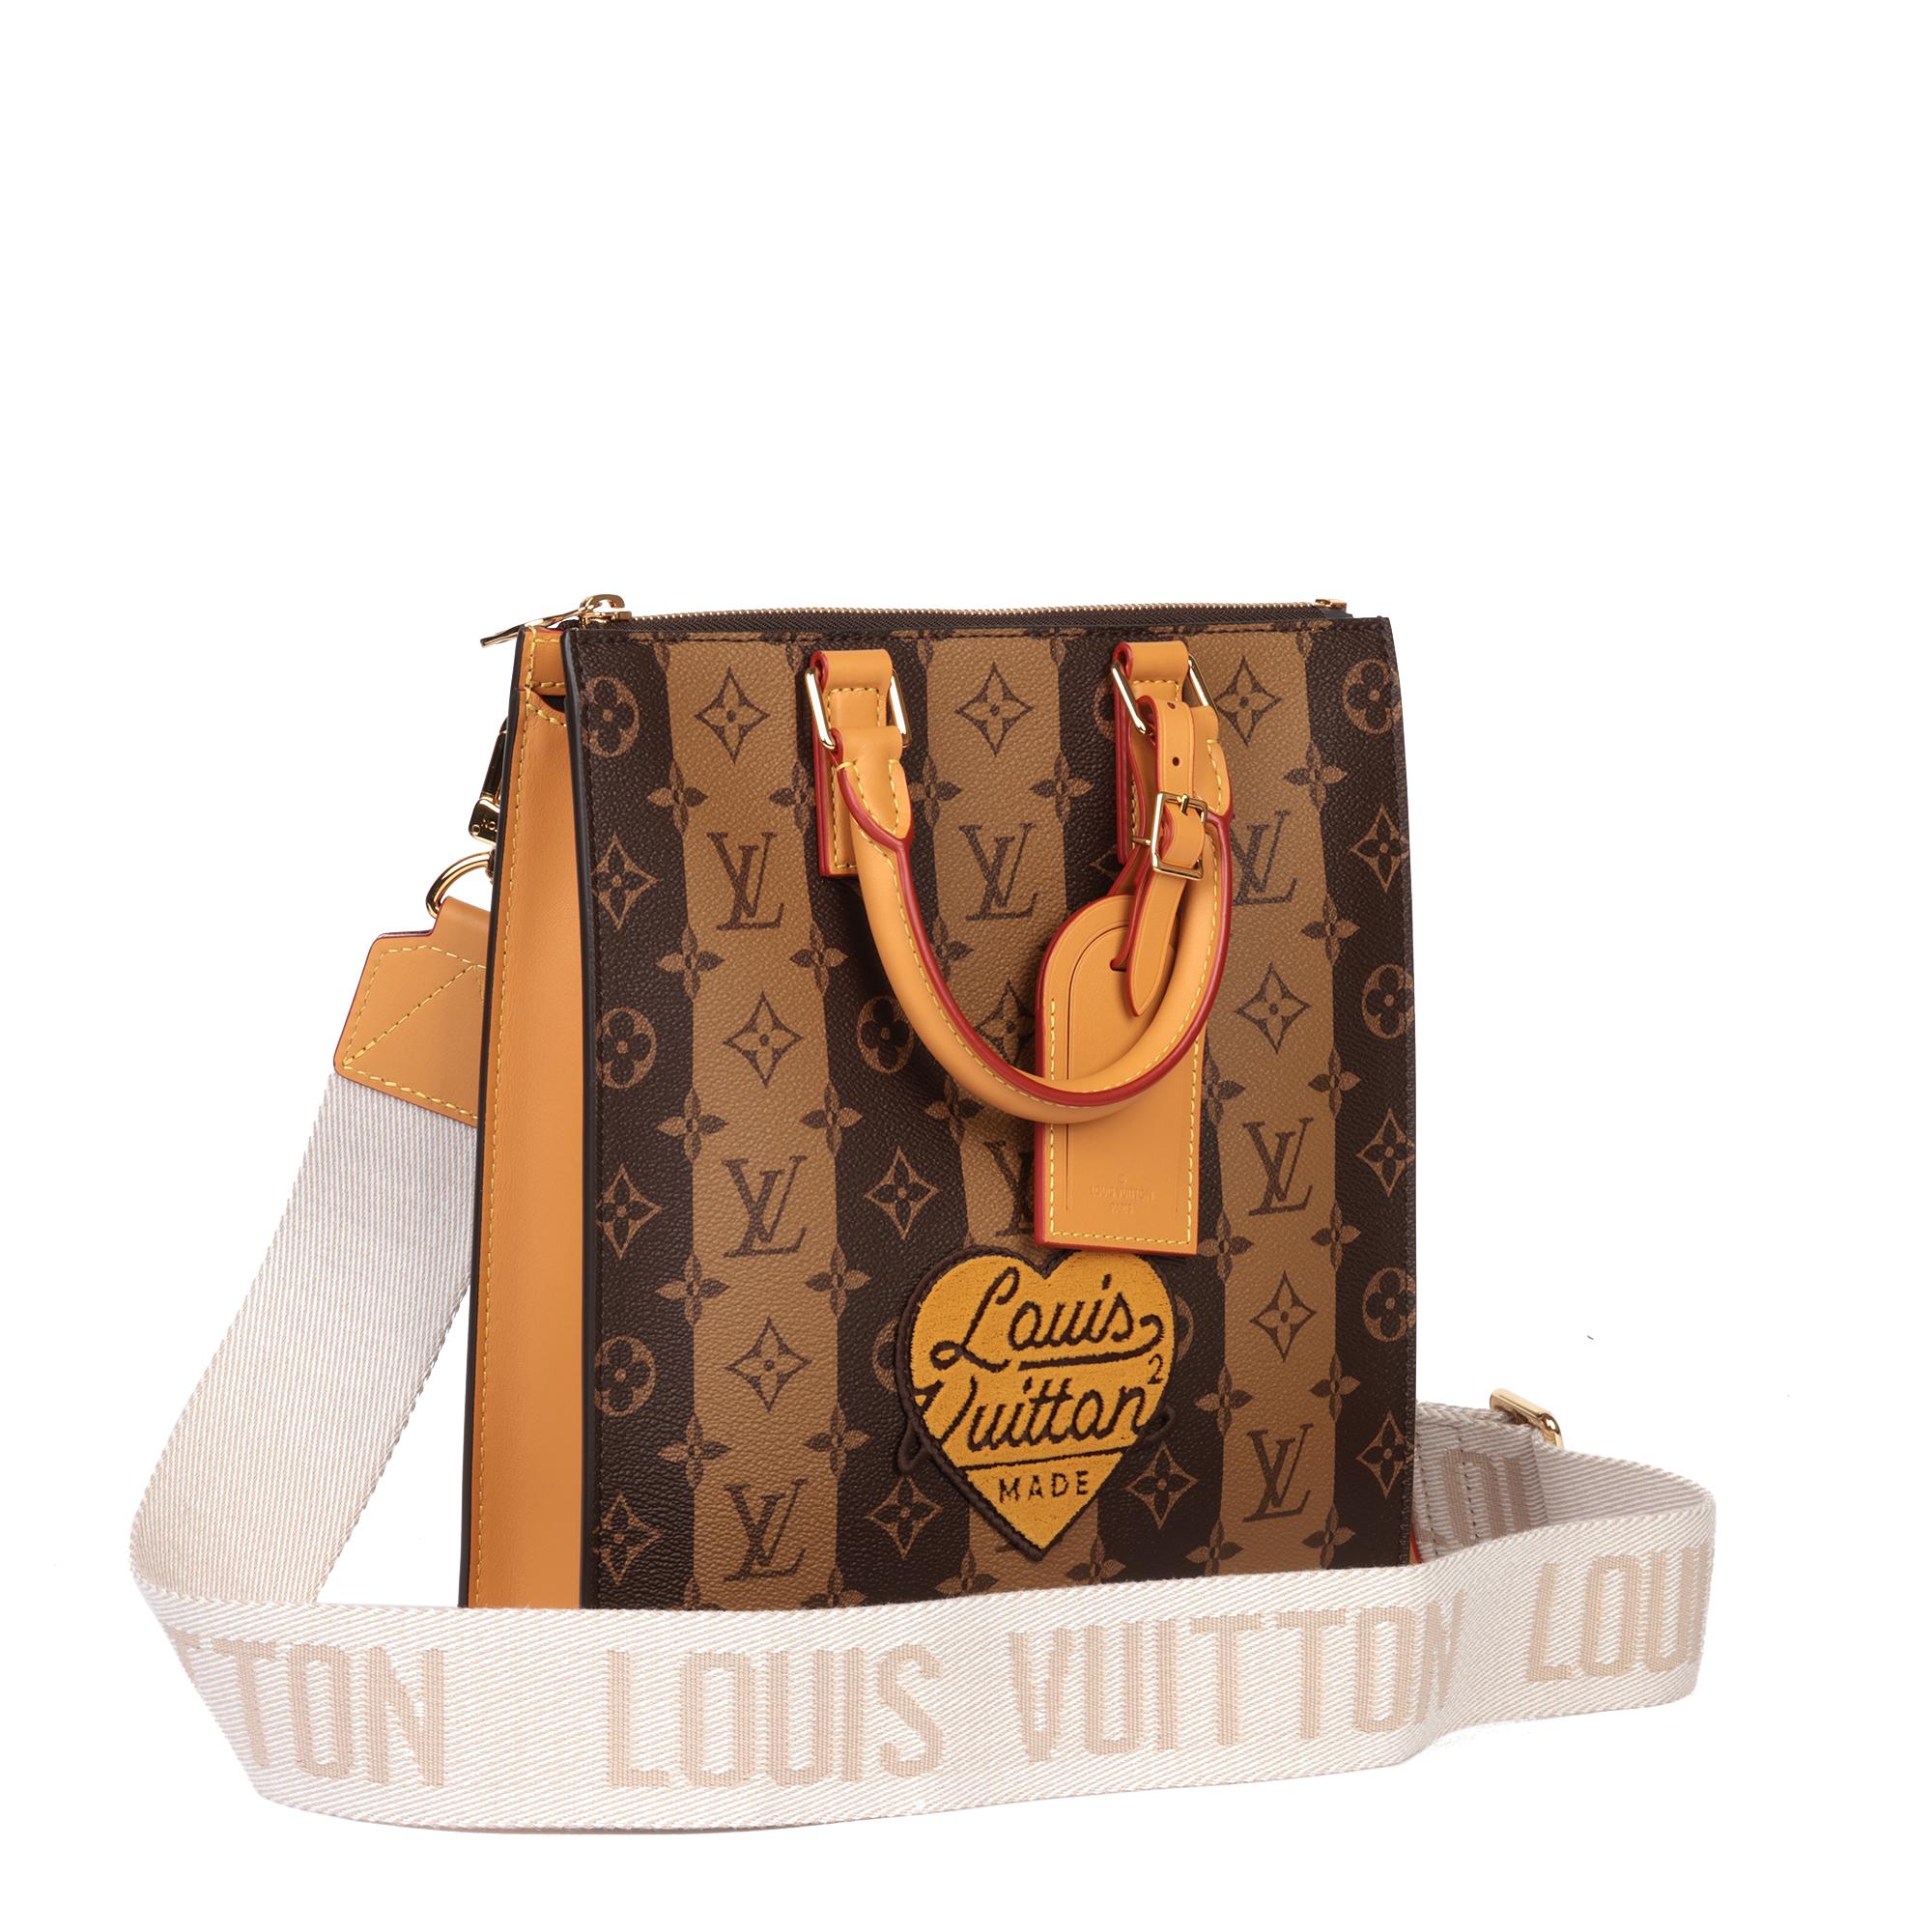 LOUIS VUITTON
x Nigo Brown Stripe Reverso Monogram Coated Canvas Sac Plat Cross

Age (Circa): 2022
Accompanied By: Louis Vuitton Dust Bag, Shoulder Strap, Box, Luggage Tag
Authenticity Details: Microchipped (Made in Italy) 
Gender: Ladies
Type: